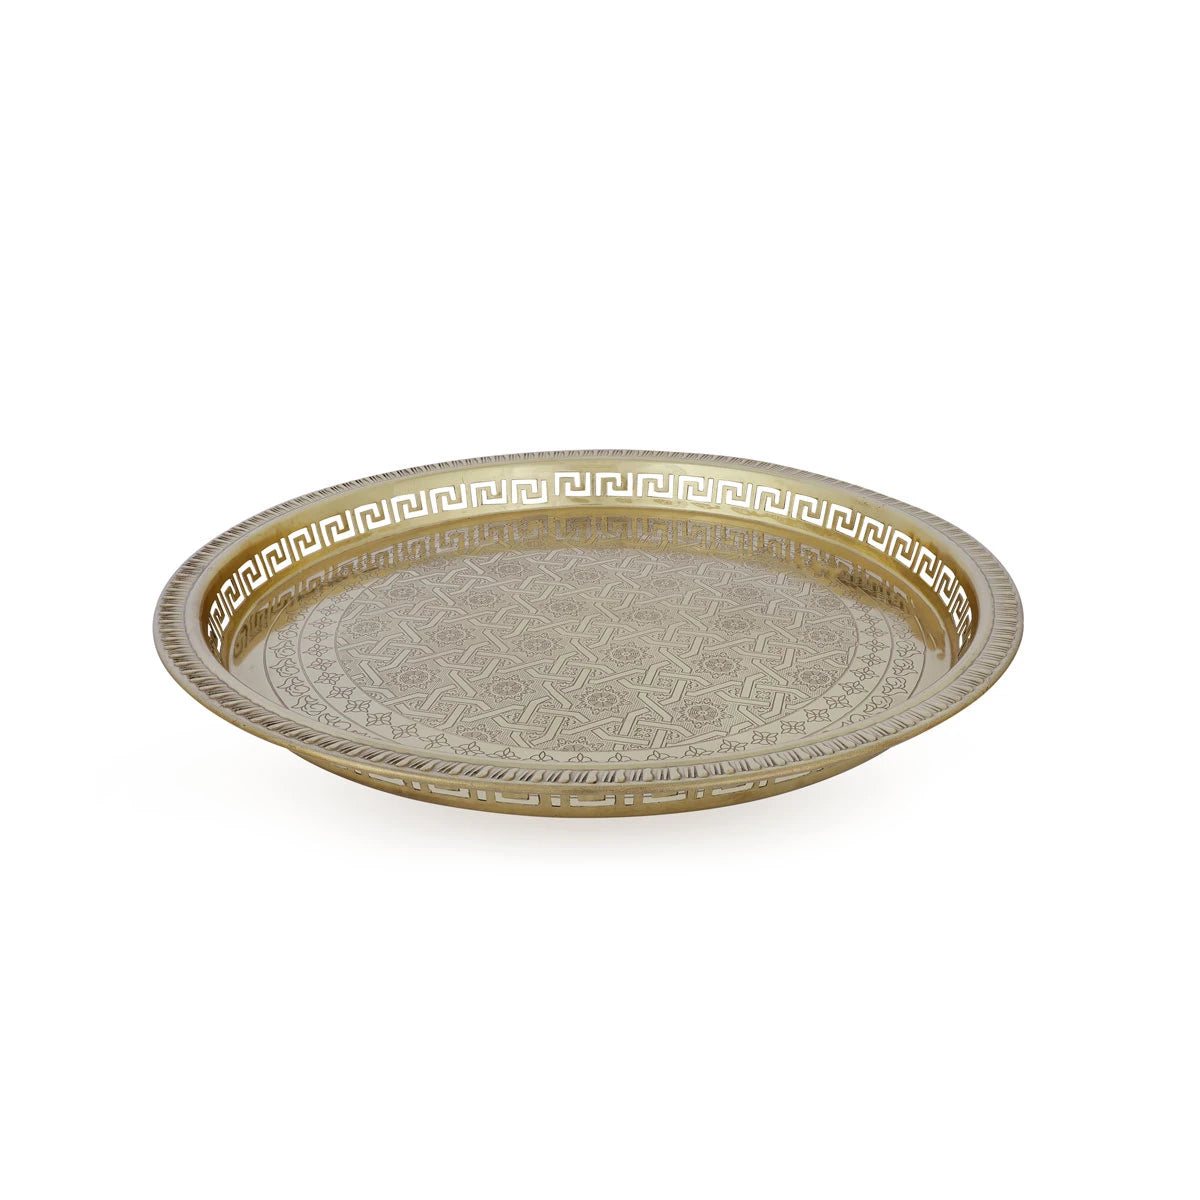 Angled Top View of Fretted Golden Color Brass Metal  Engraved Tray